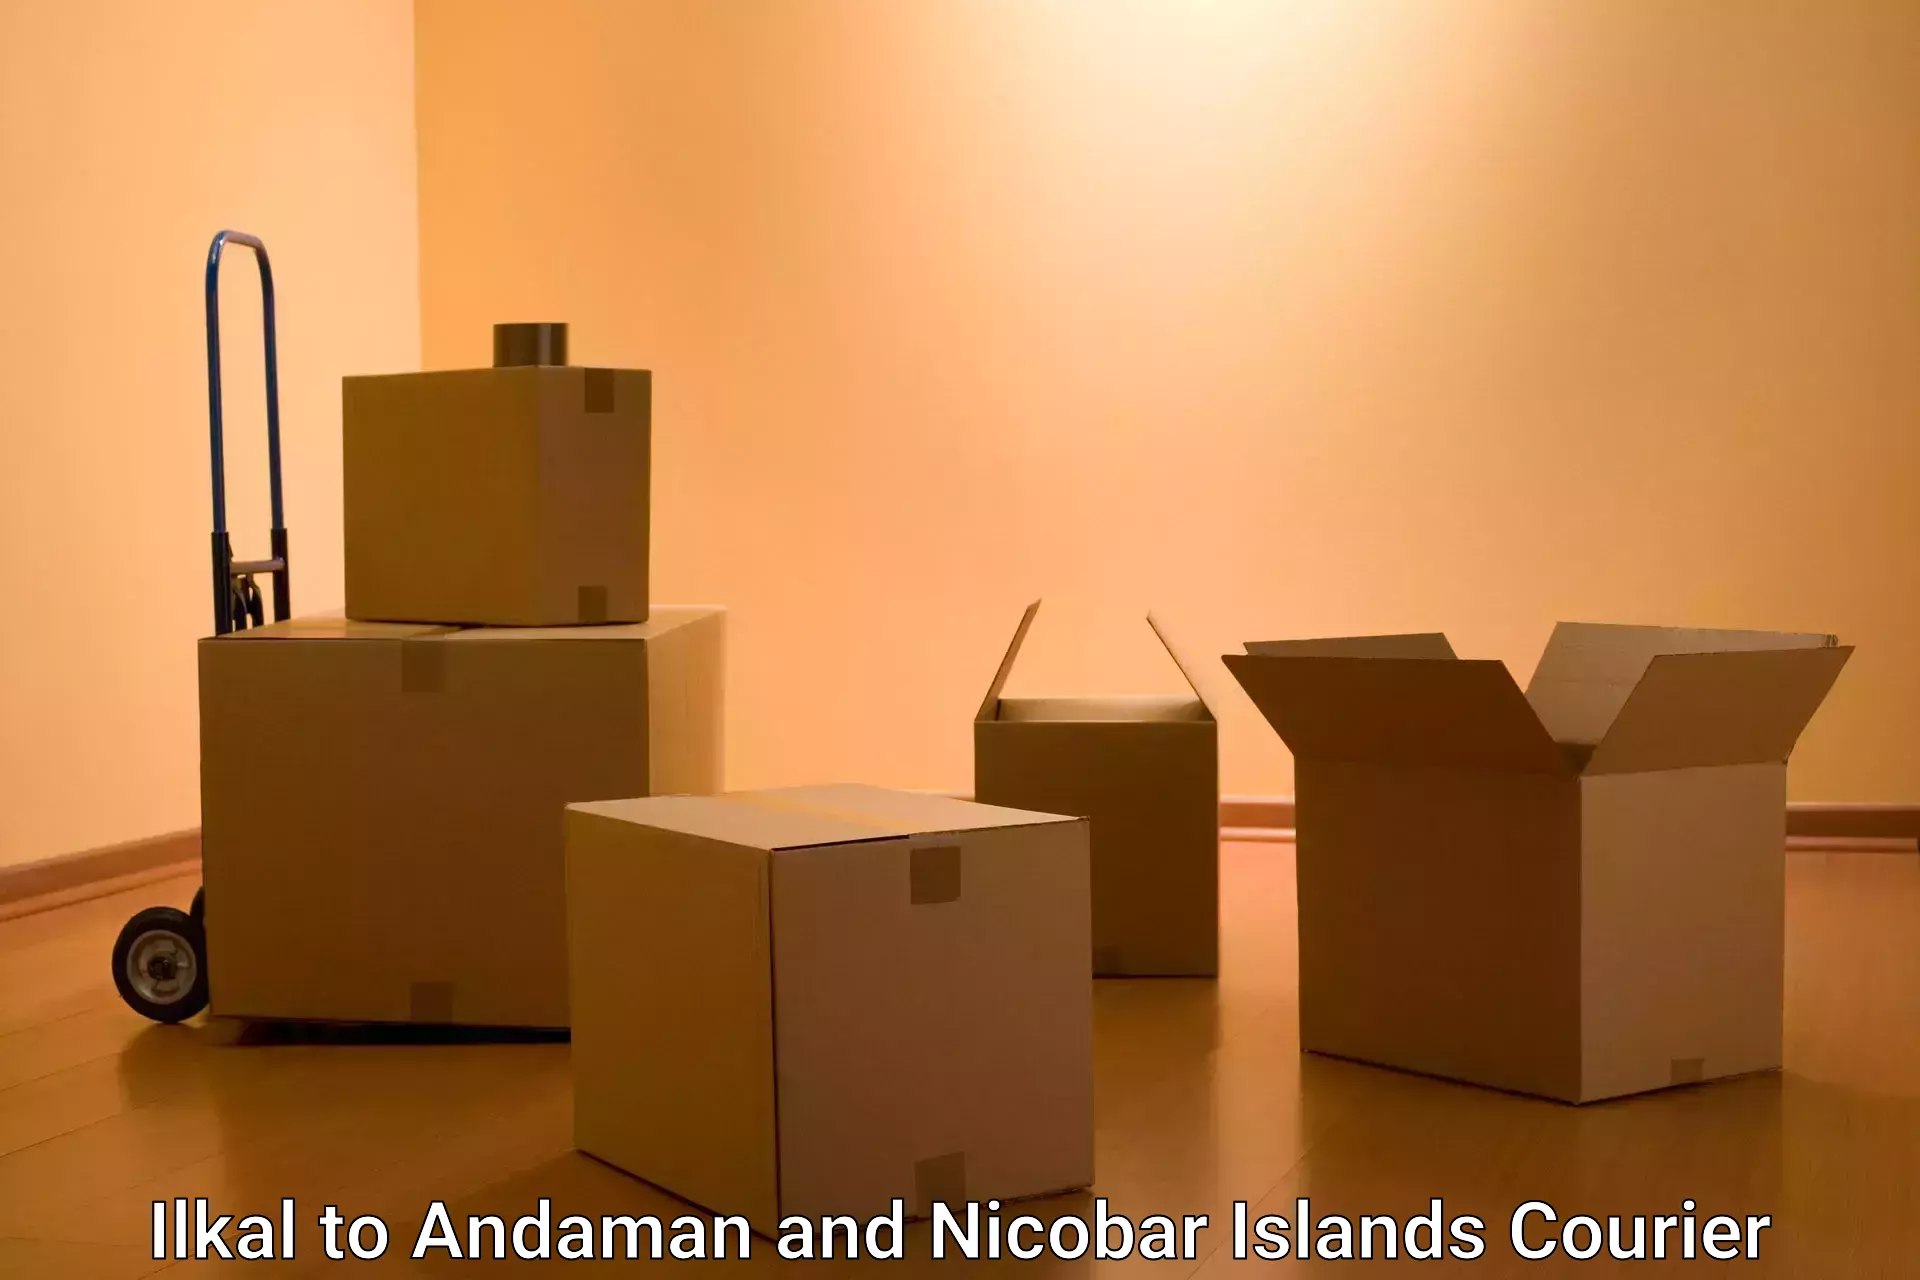 State-of-the-art courier technology Ilkal to North And Middle Andaman